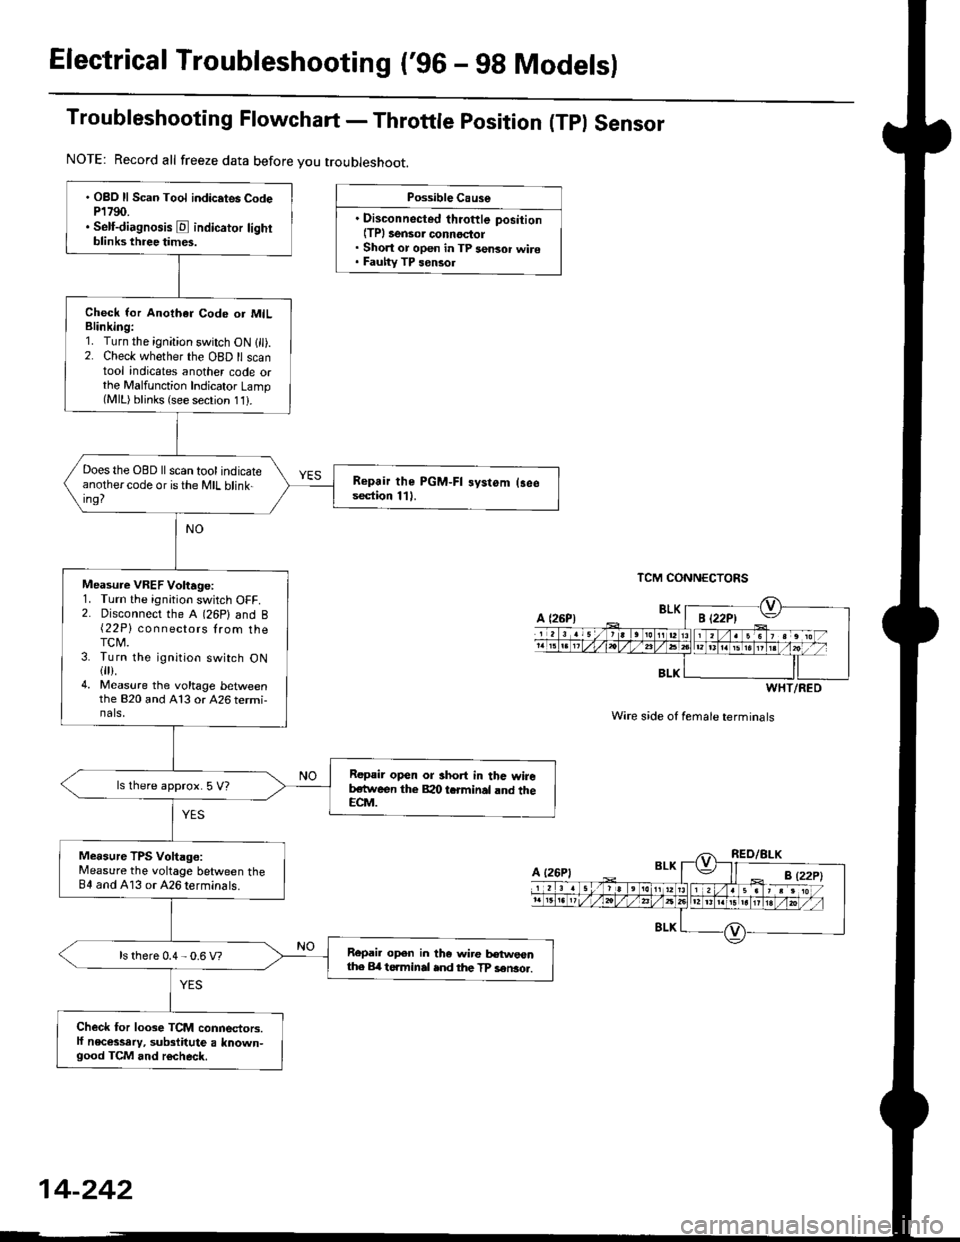 HONDA CIVIC 1998 6.G Workshop Manual Electrical Troubleshooting (96 - 98 Modelsl
Troubleshooting Flowchart - Throttle position (Tpl Sensor
Possible Cause
. Disconnected throftle position(TPl 3ensor connoctol. Short or open in TP sensor 